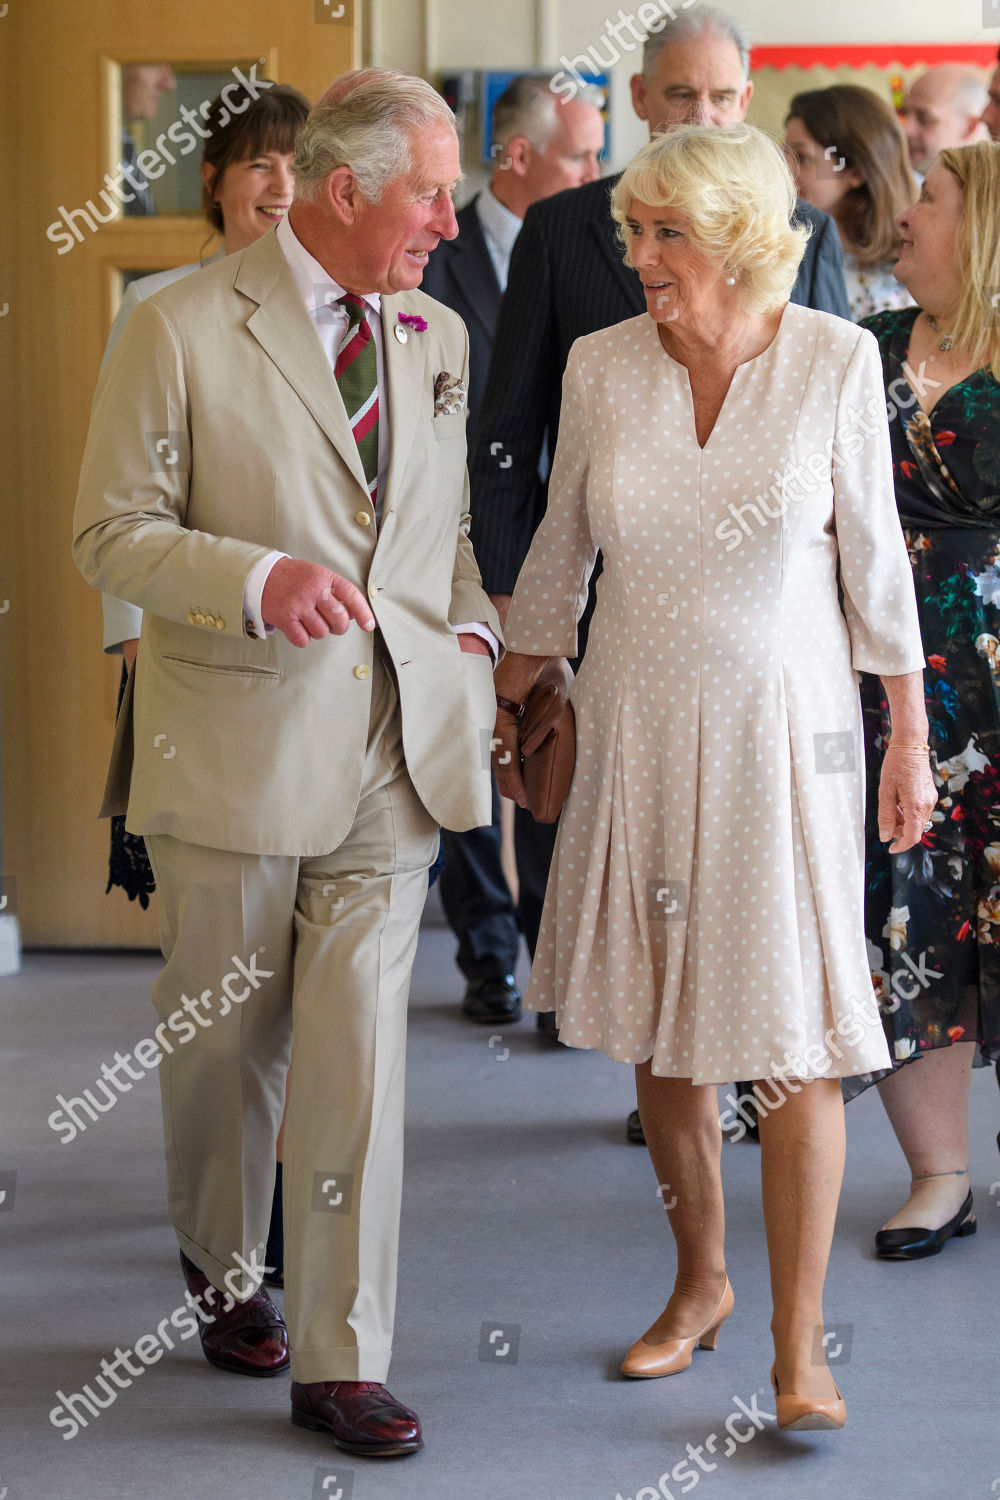 prince-charles-and-camilla-duchess-of-cornwall-visit-to-wales-uk-shutterstock-editorial-10327726bk.jpg